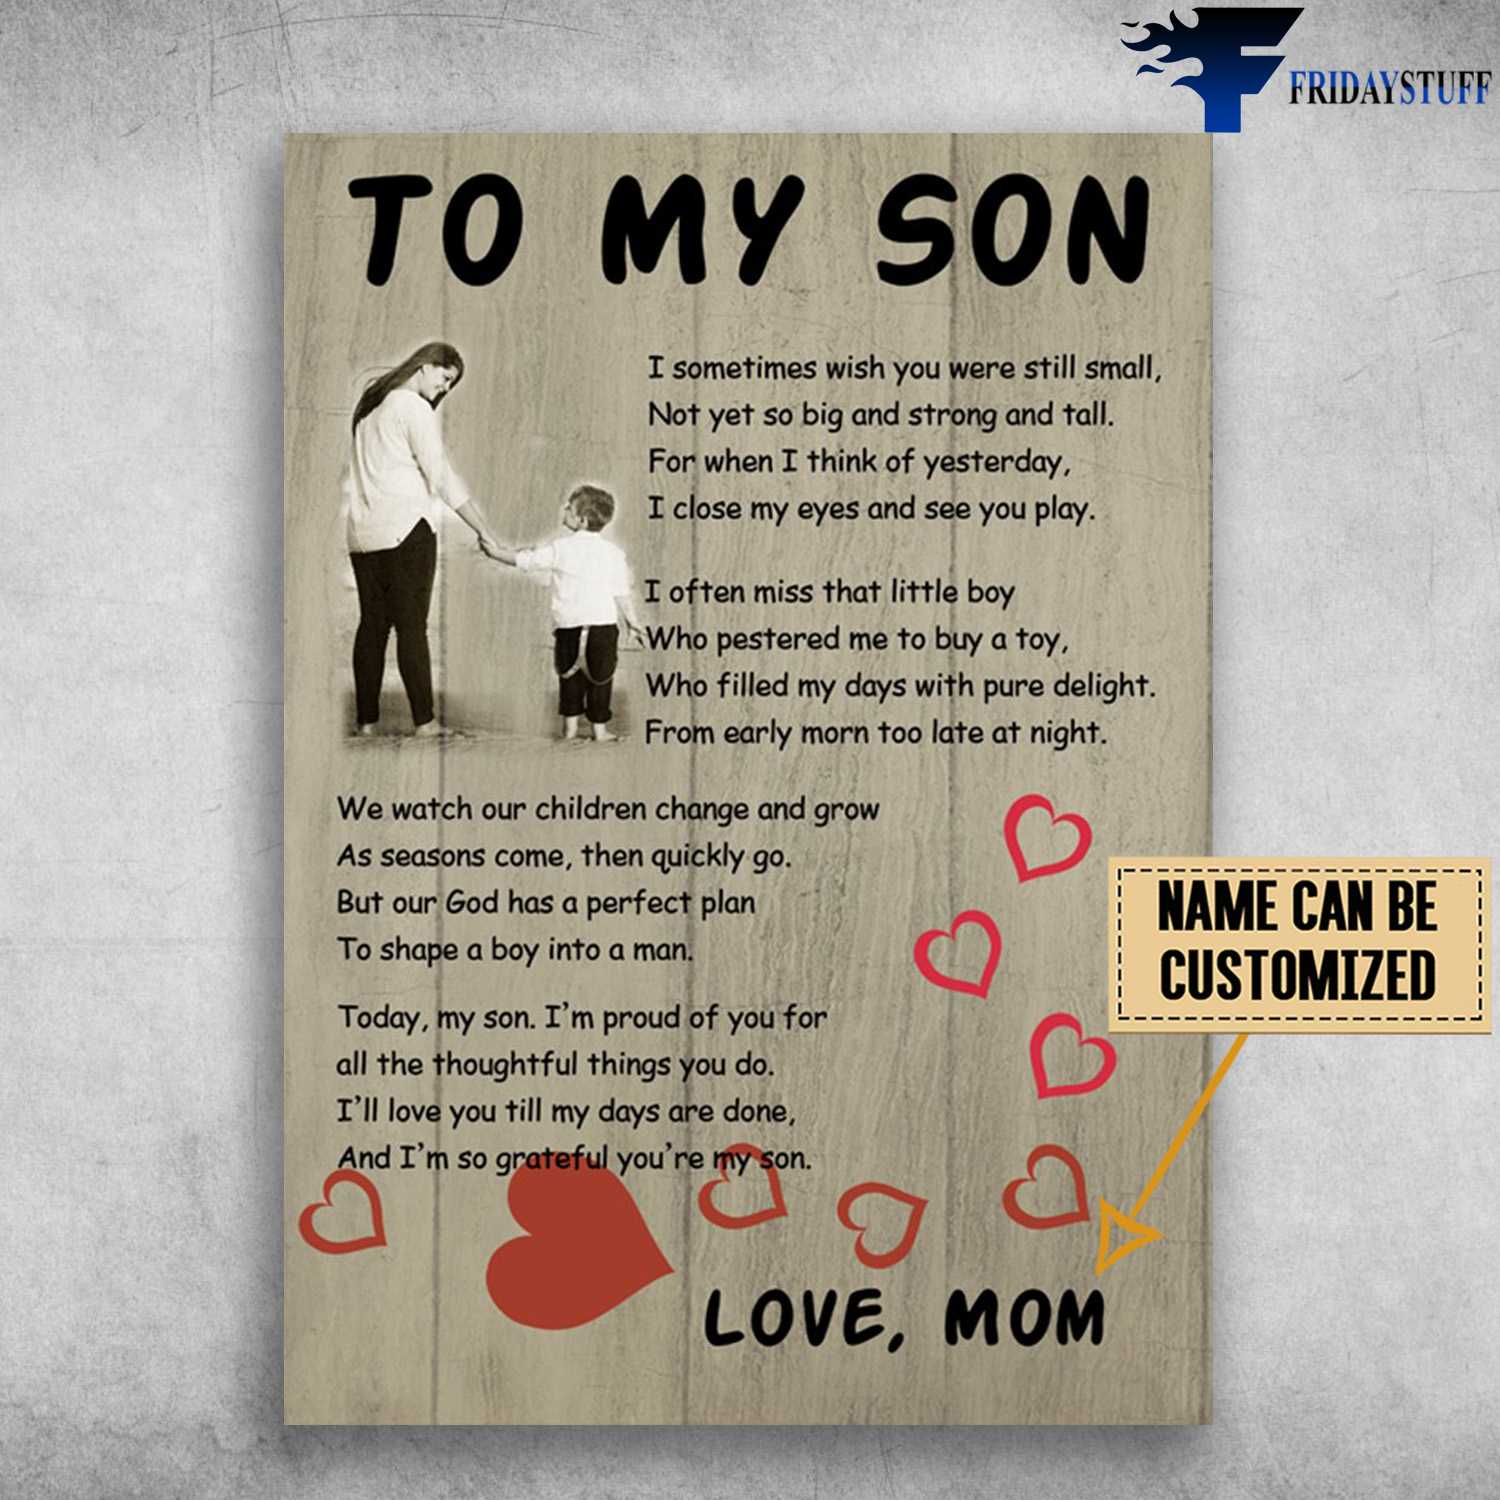 Mom And Son, To My Son, I Sometimes Wish You Were Still Small, Not Yet So Big And Strong And Tall, For When I Think Of Yesterday, I Close My Eyes And See You Play